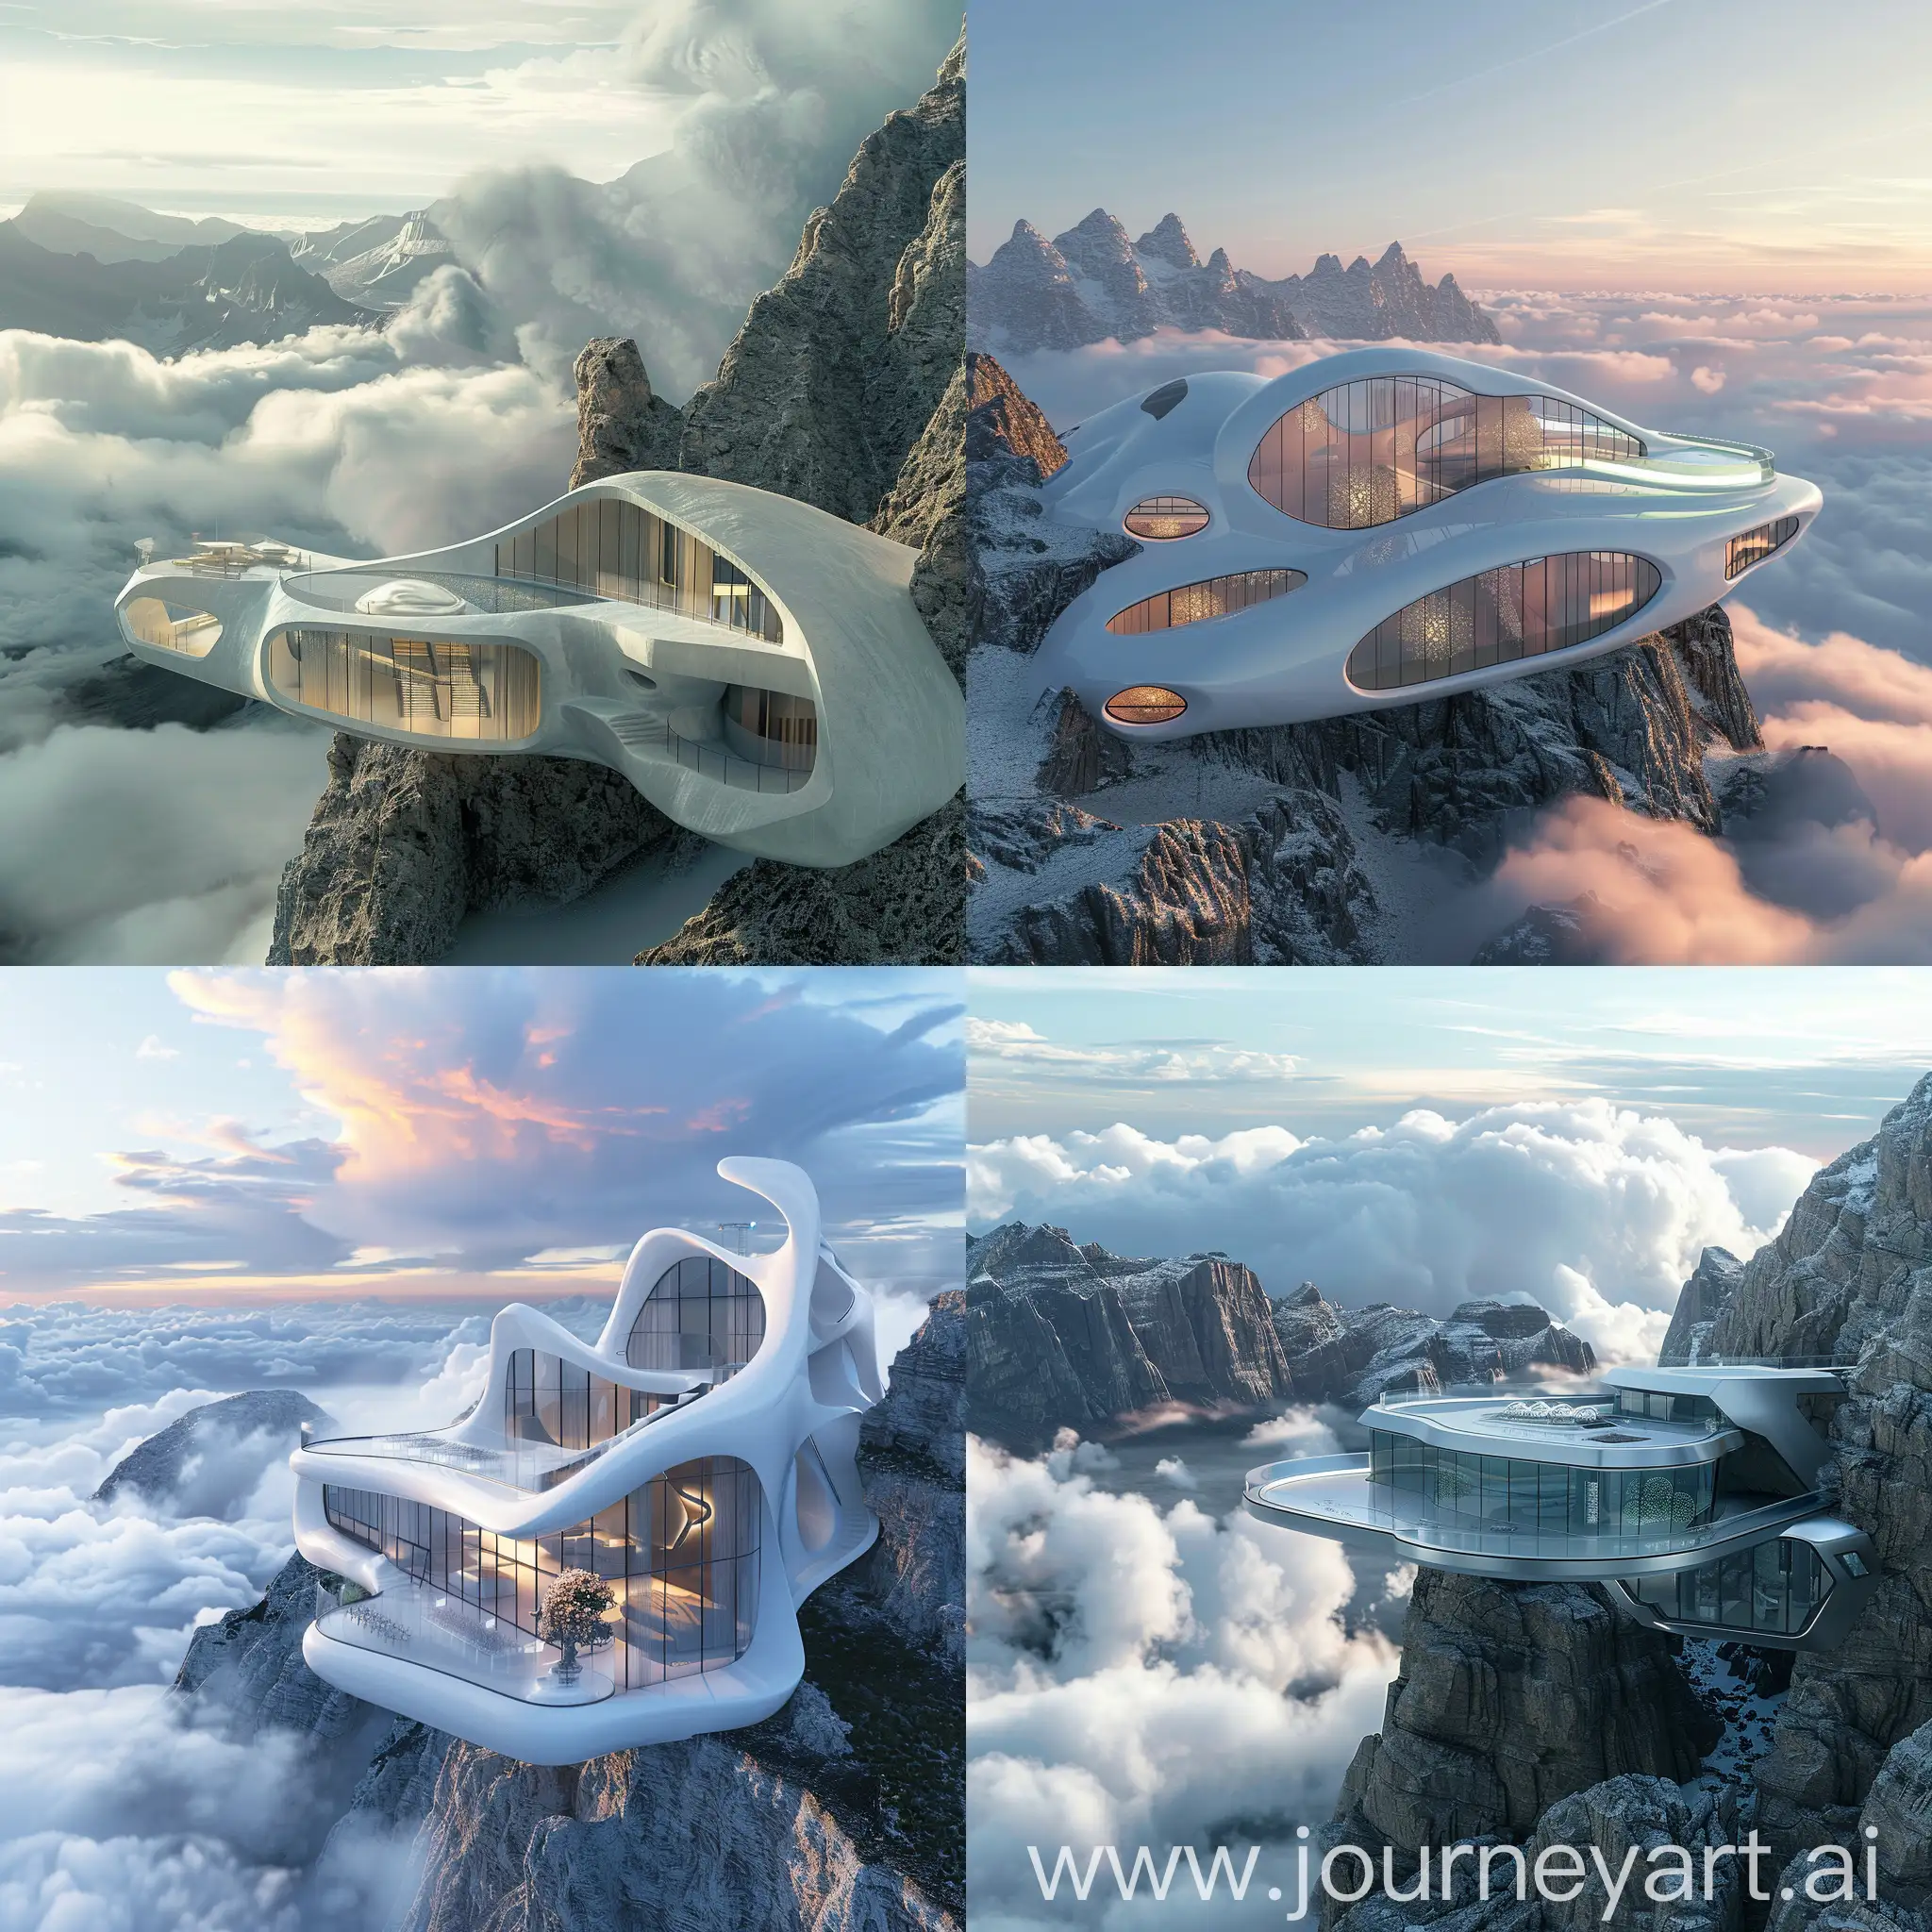 futuristic villa, microbiology, high in the mountains above the clouds